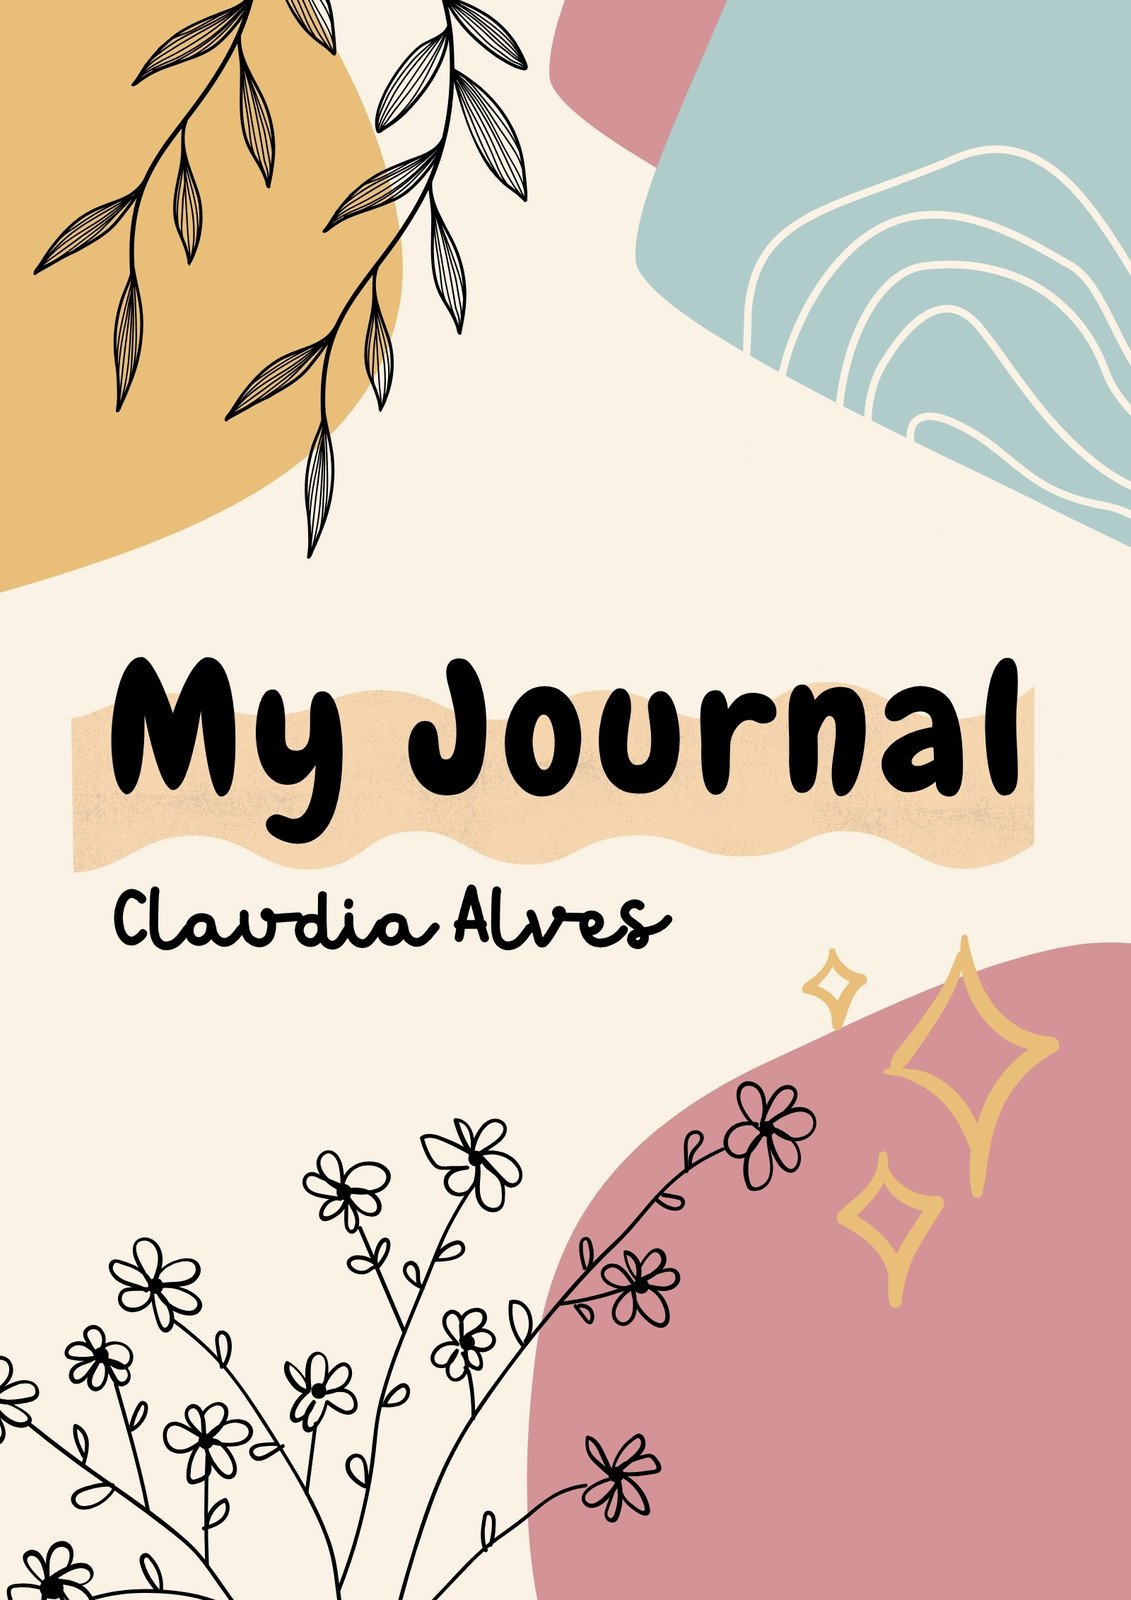 100 Relationship Journal Prompts Canva Graphic by MR ART · Creative Fabrica